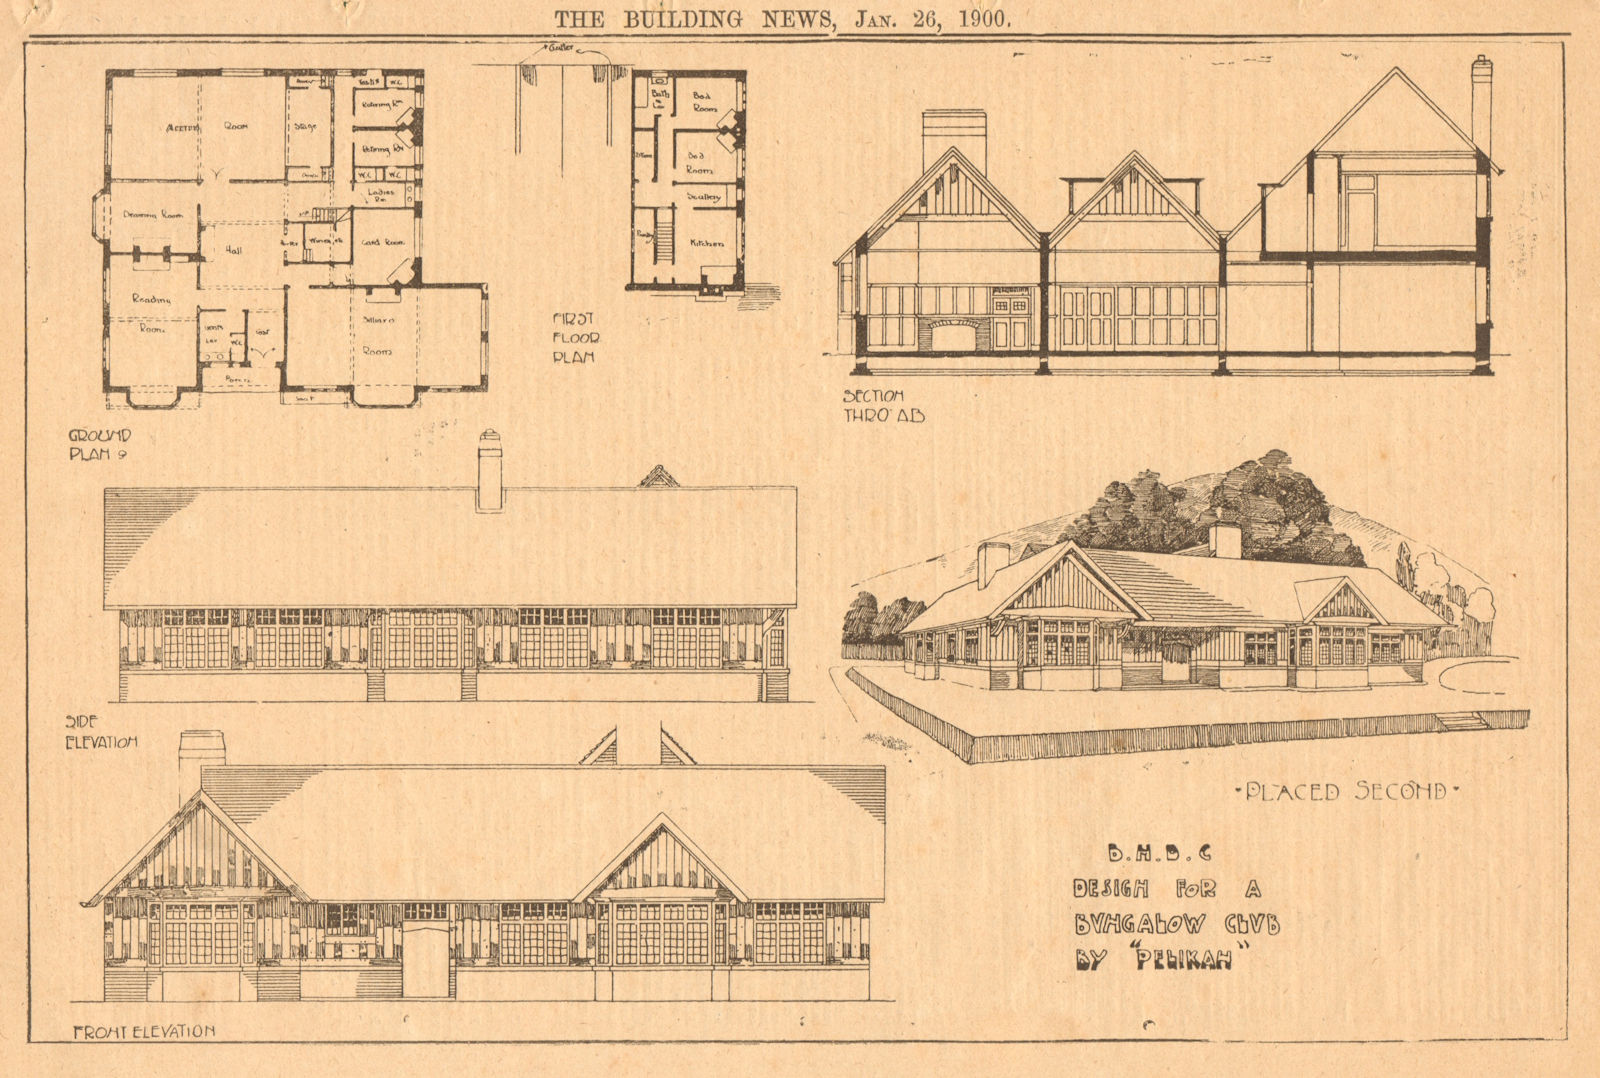 Design for a bungalow club by ''Pelikan''. Plans, section & elevations 1900